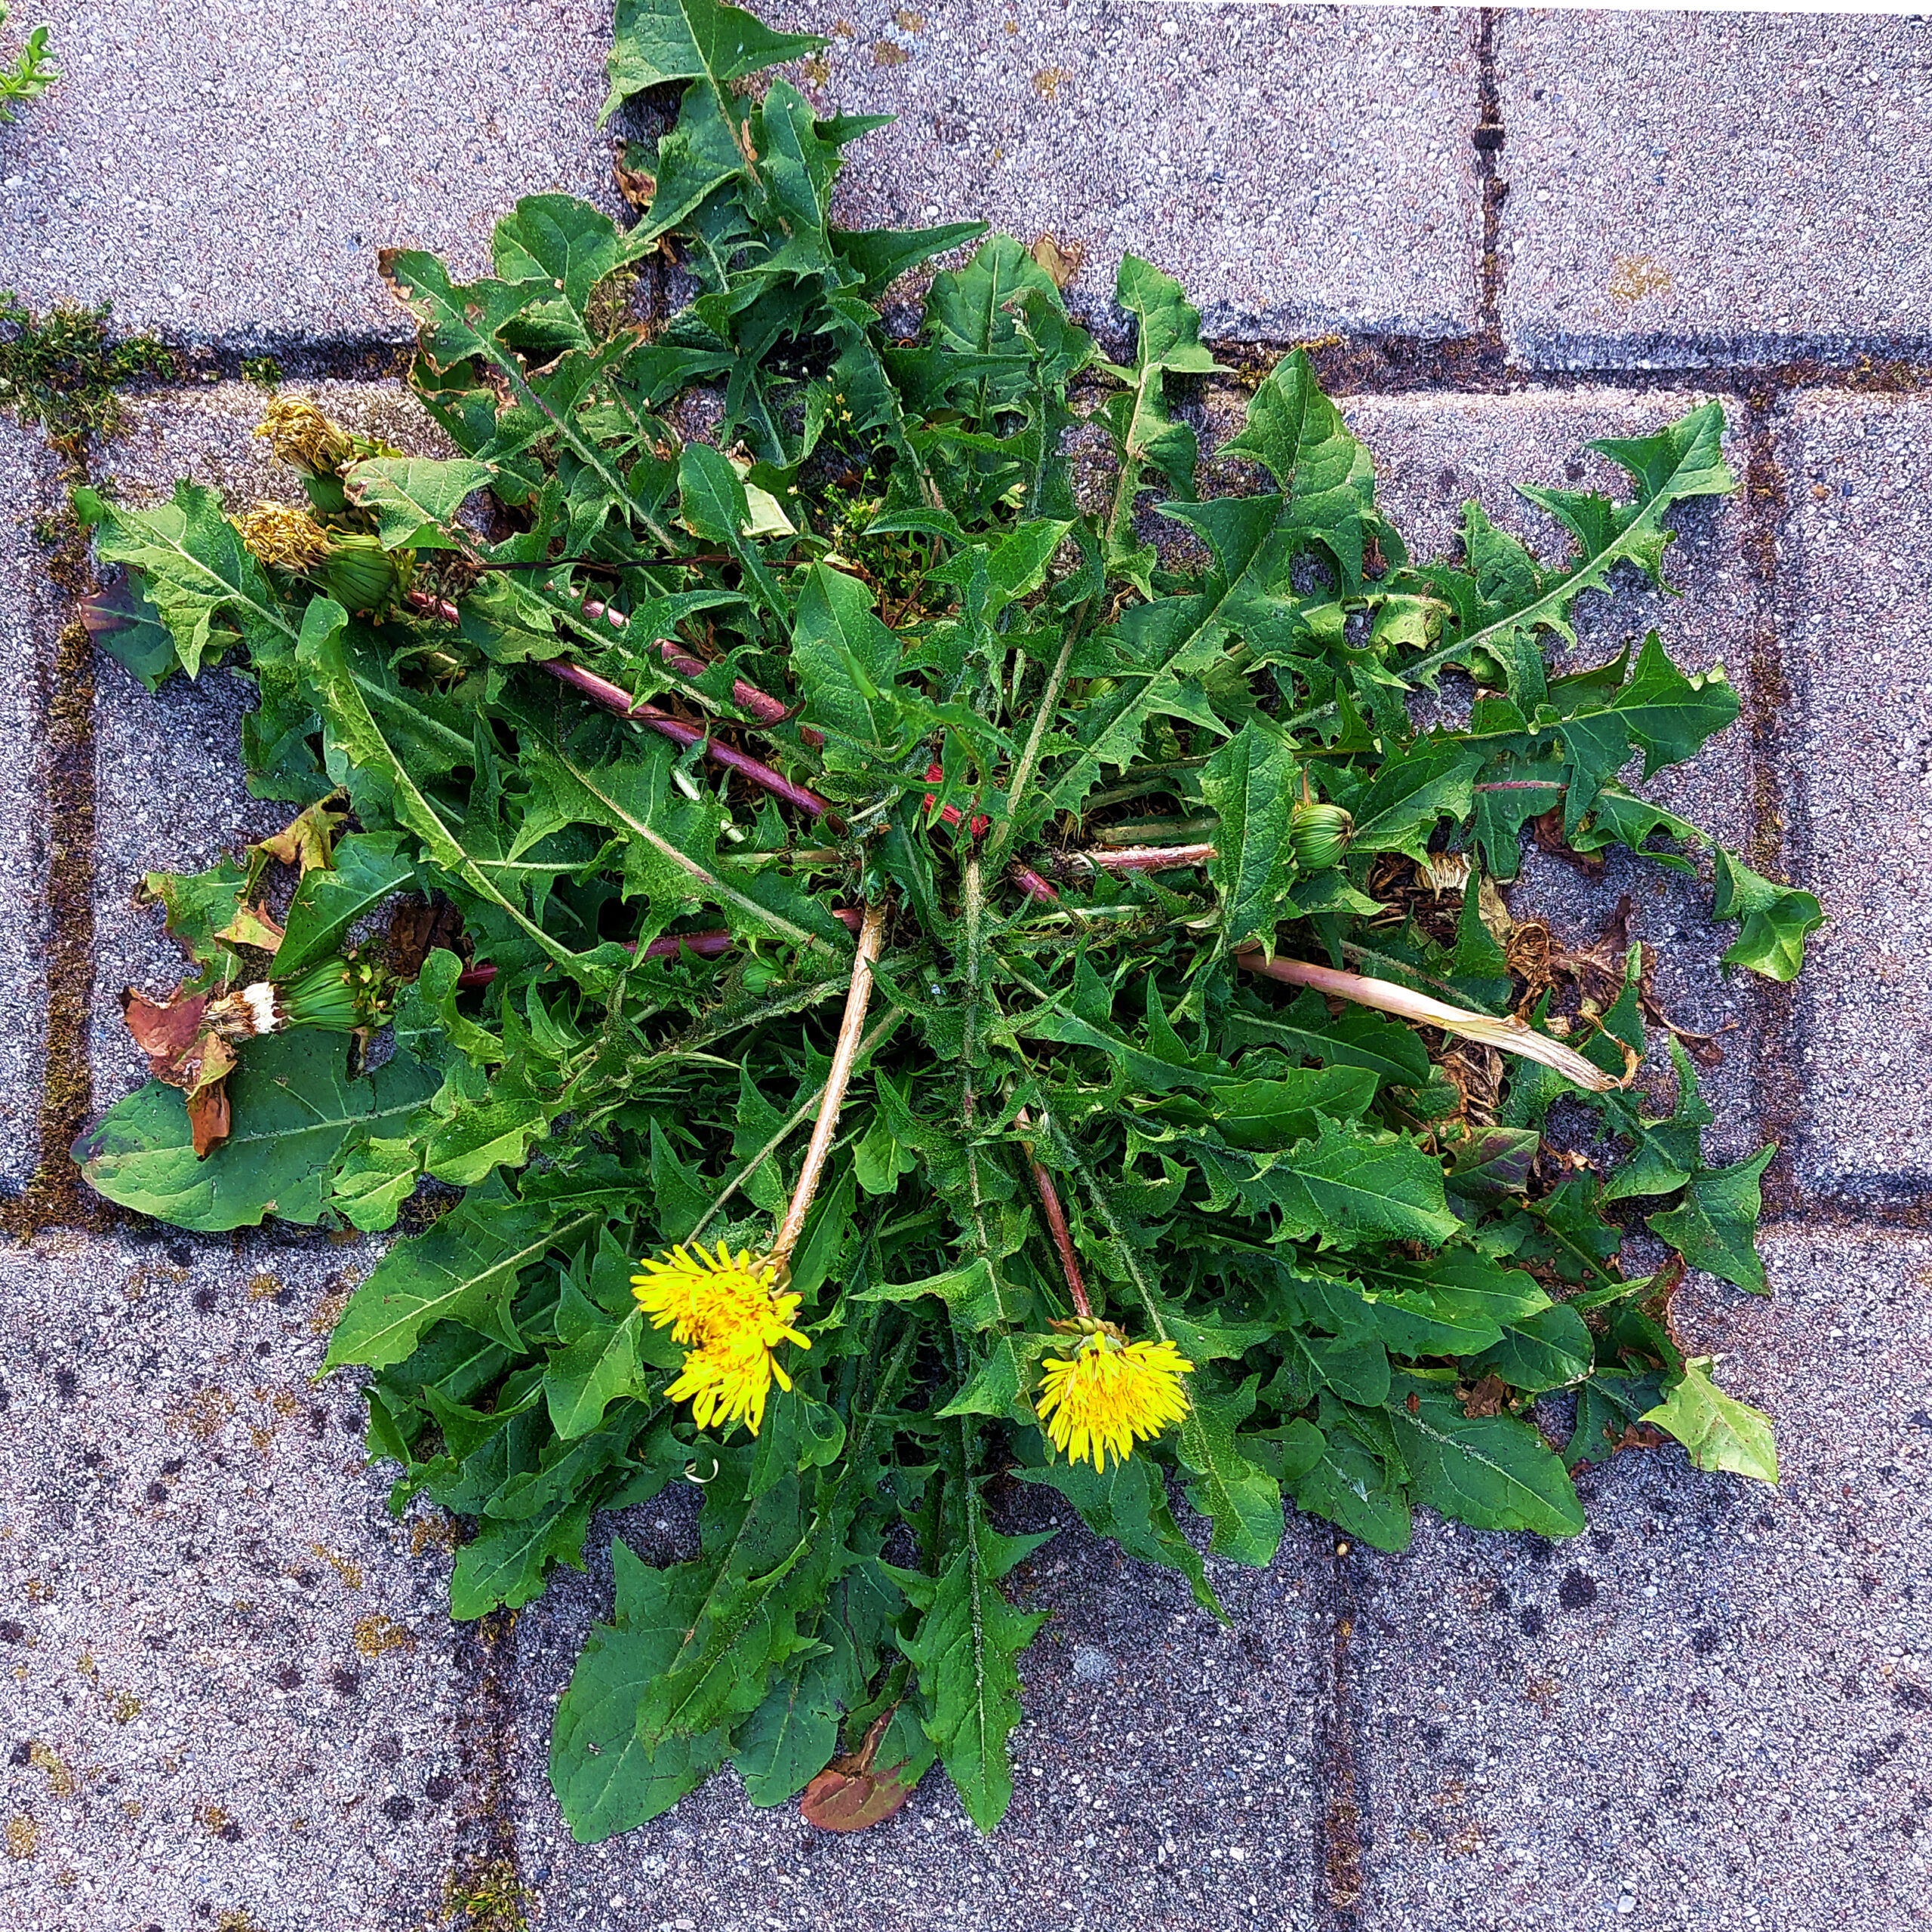 The strength of nature III: Wild flowers grows through splits in bricks and cement